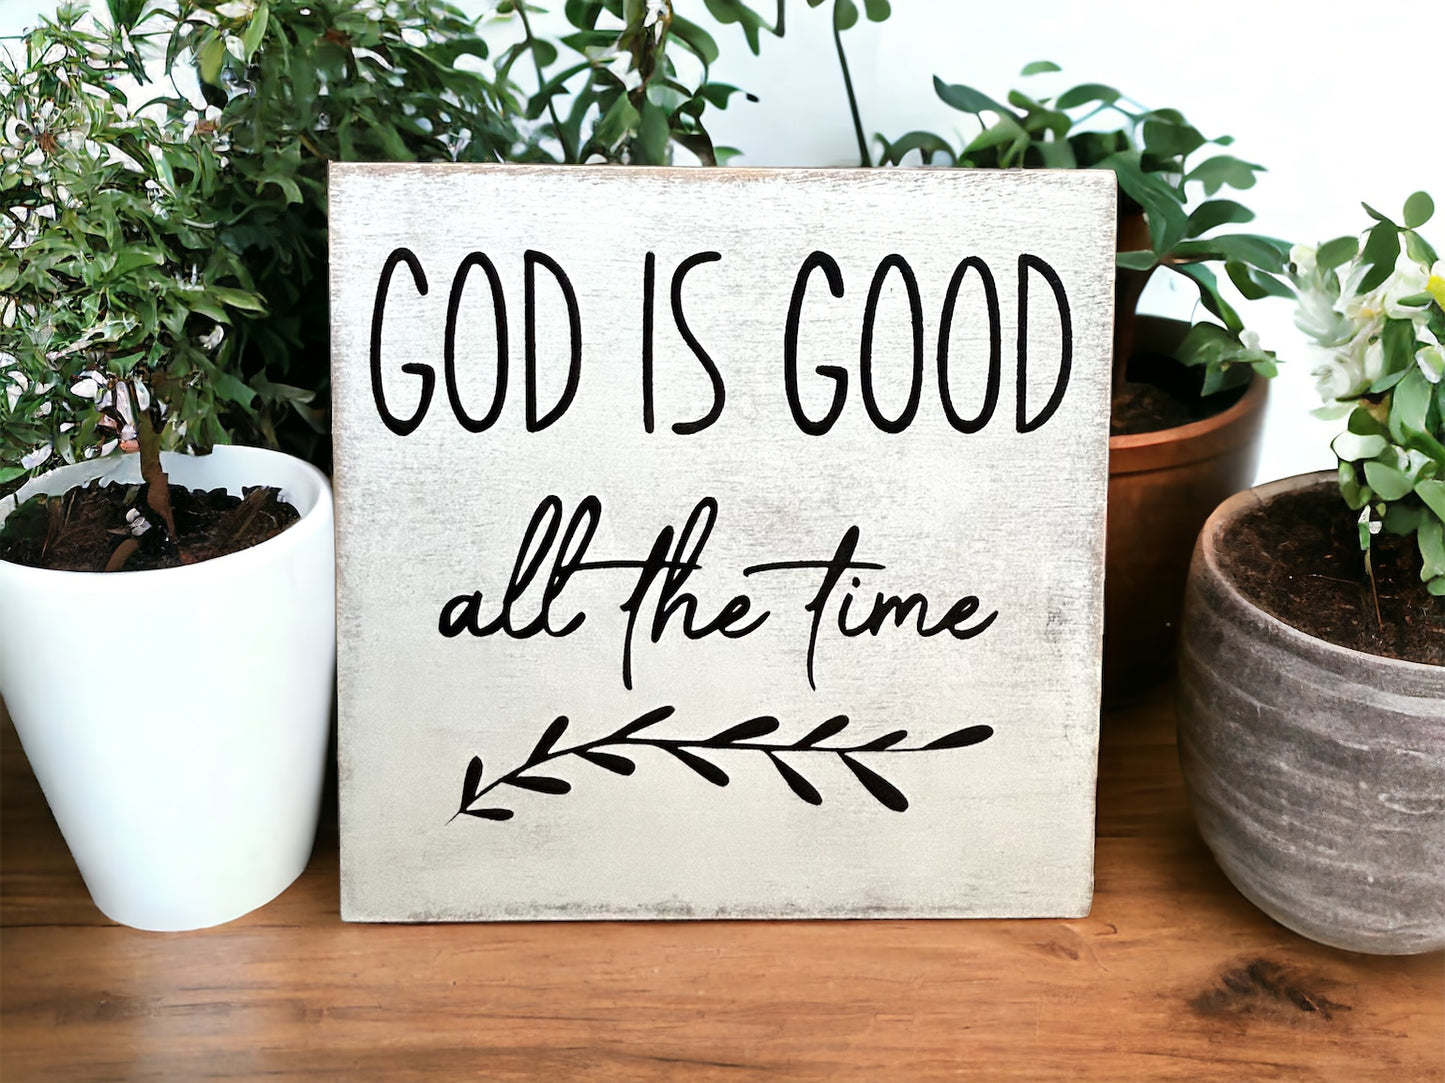 God is Good all the Time - Rustic Wood Sign